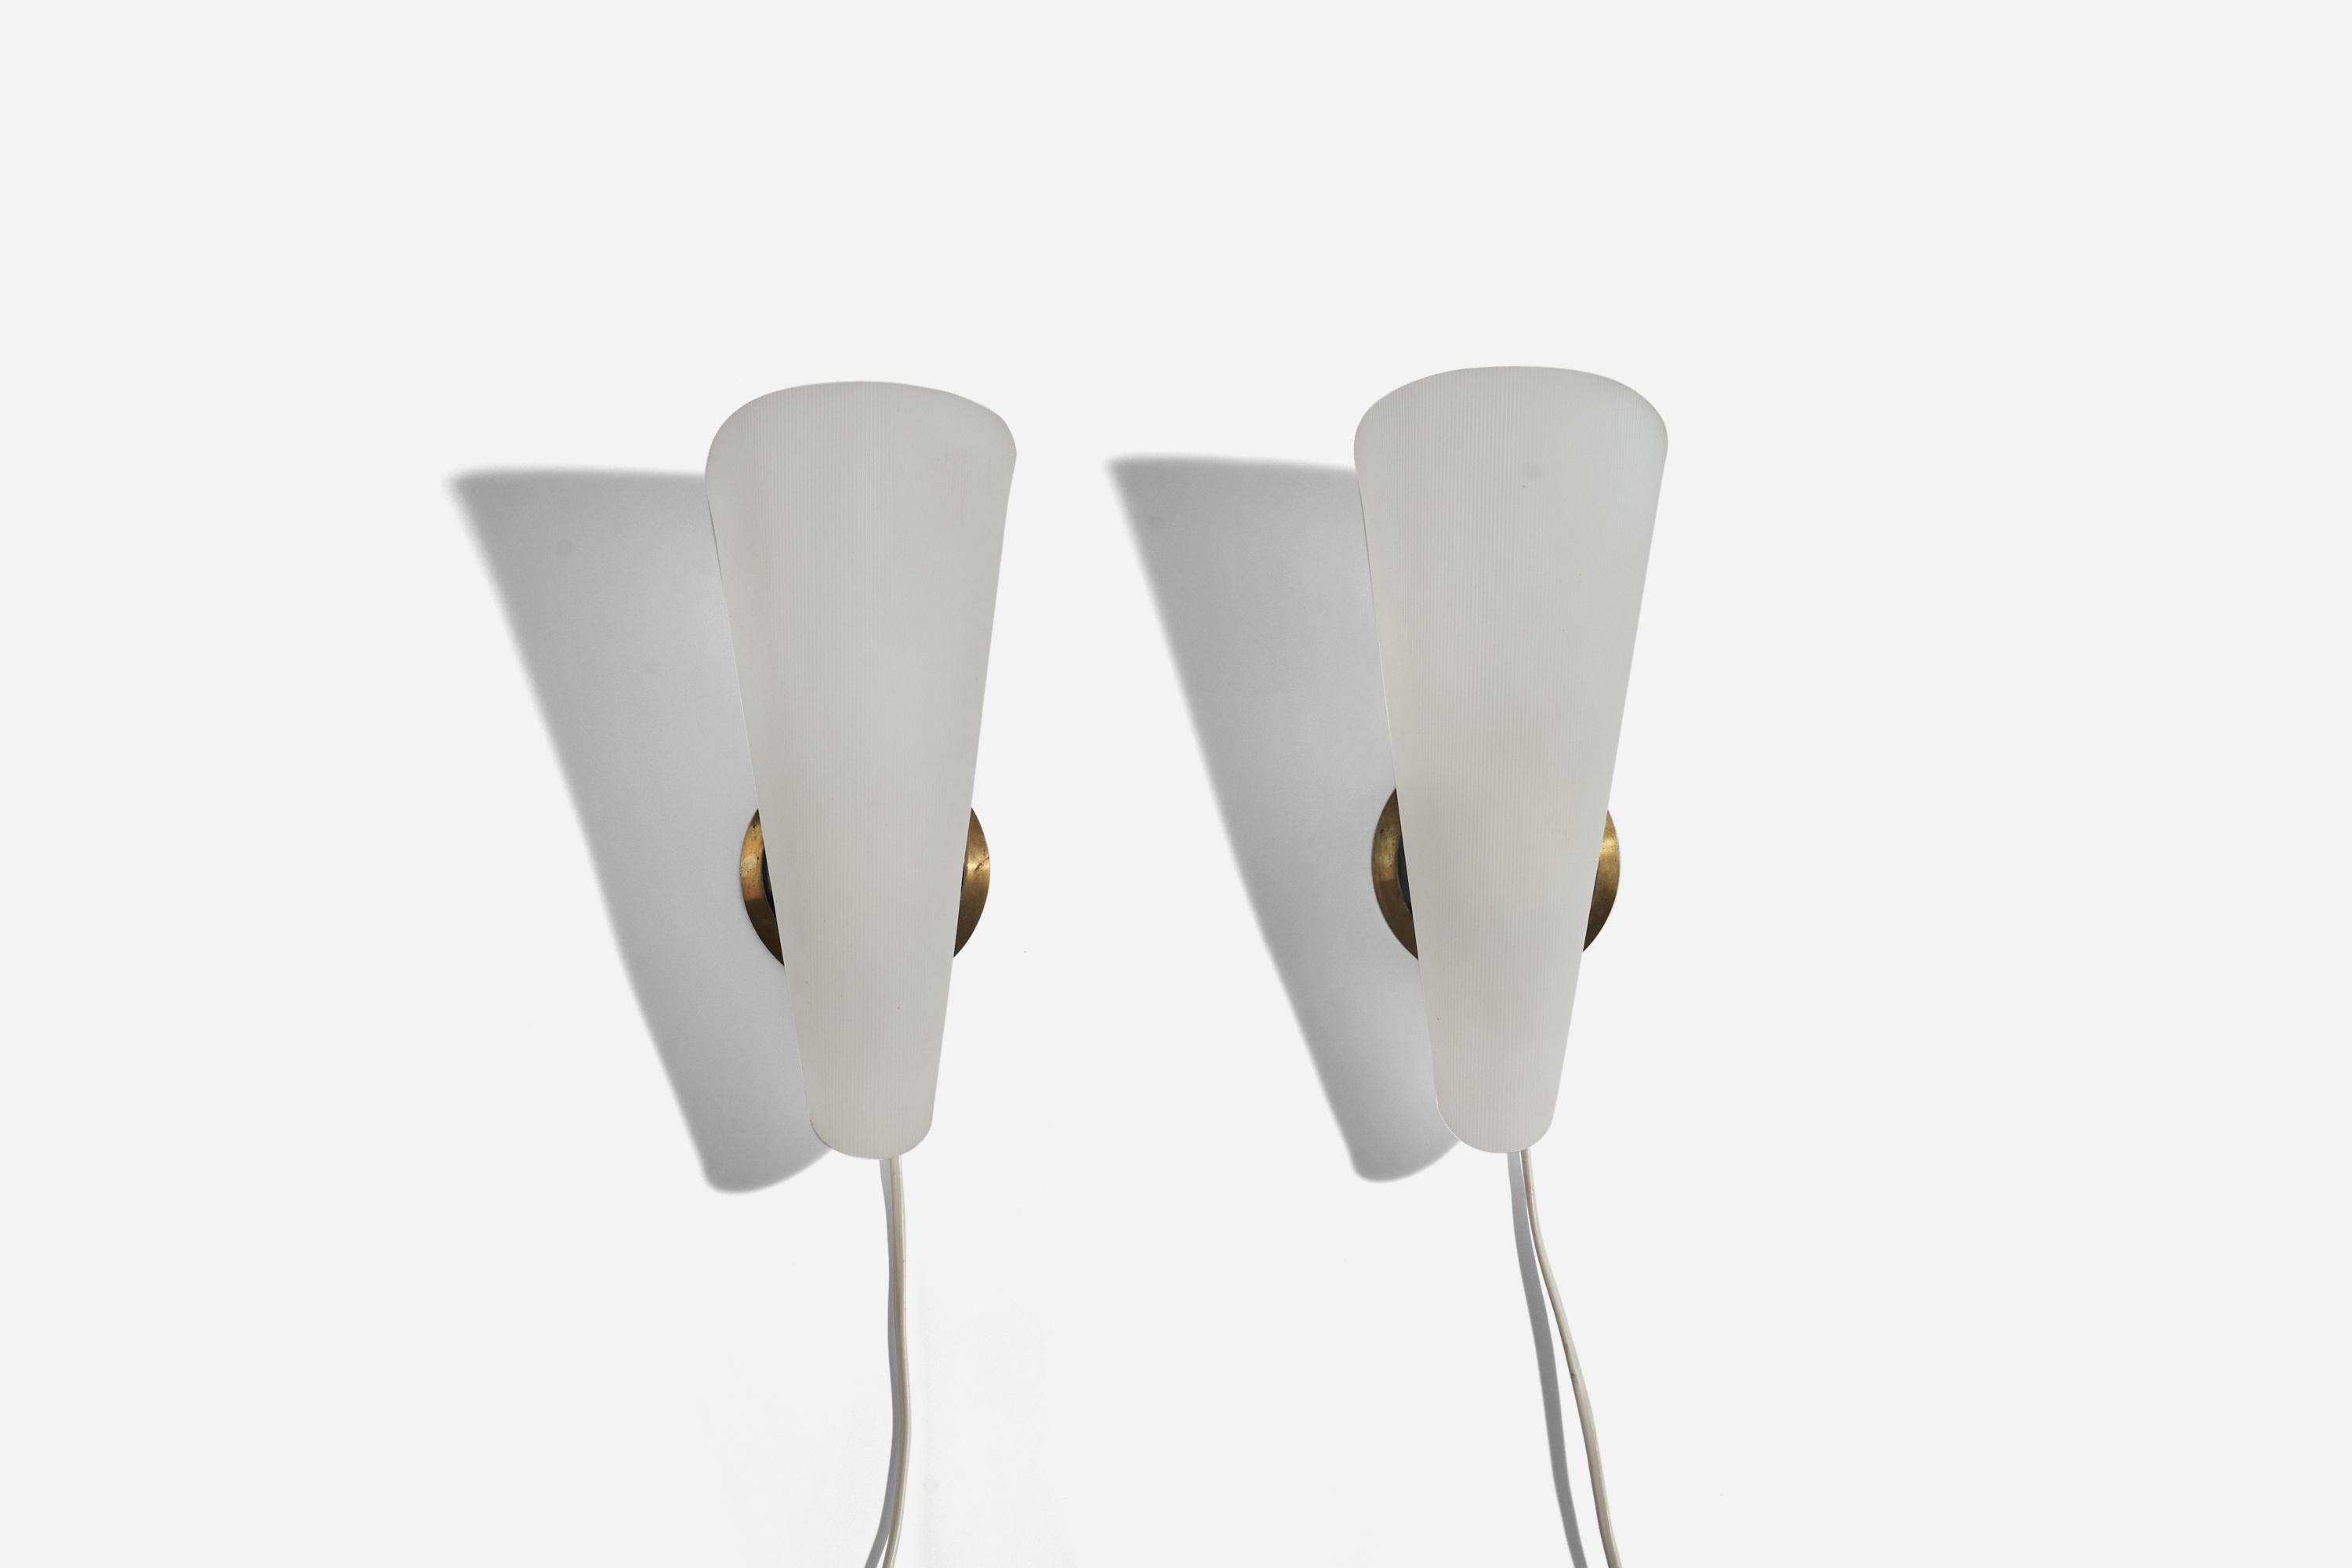 A pair of brass, acrylic and metal sconces/ wall lights designed and produced in Sweden, c. 1950s. 

Dimensions of Back Plate (inches) : 3.75 x 3.75 x 0.87 (Height x Width x Depth)

Socket takes E-14 bulb.

There is no maximum wattage stated